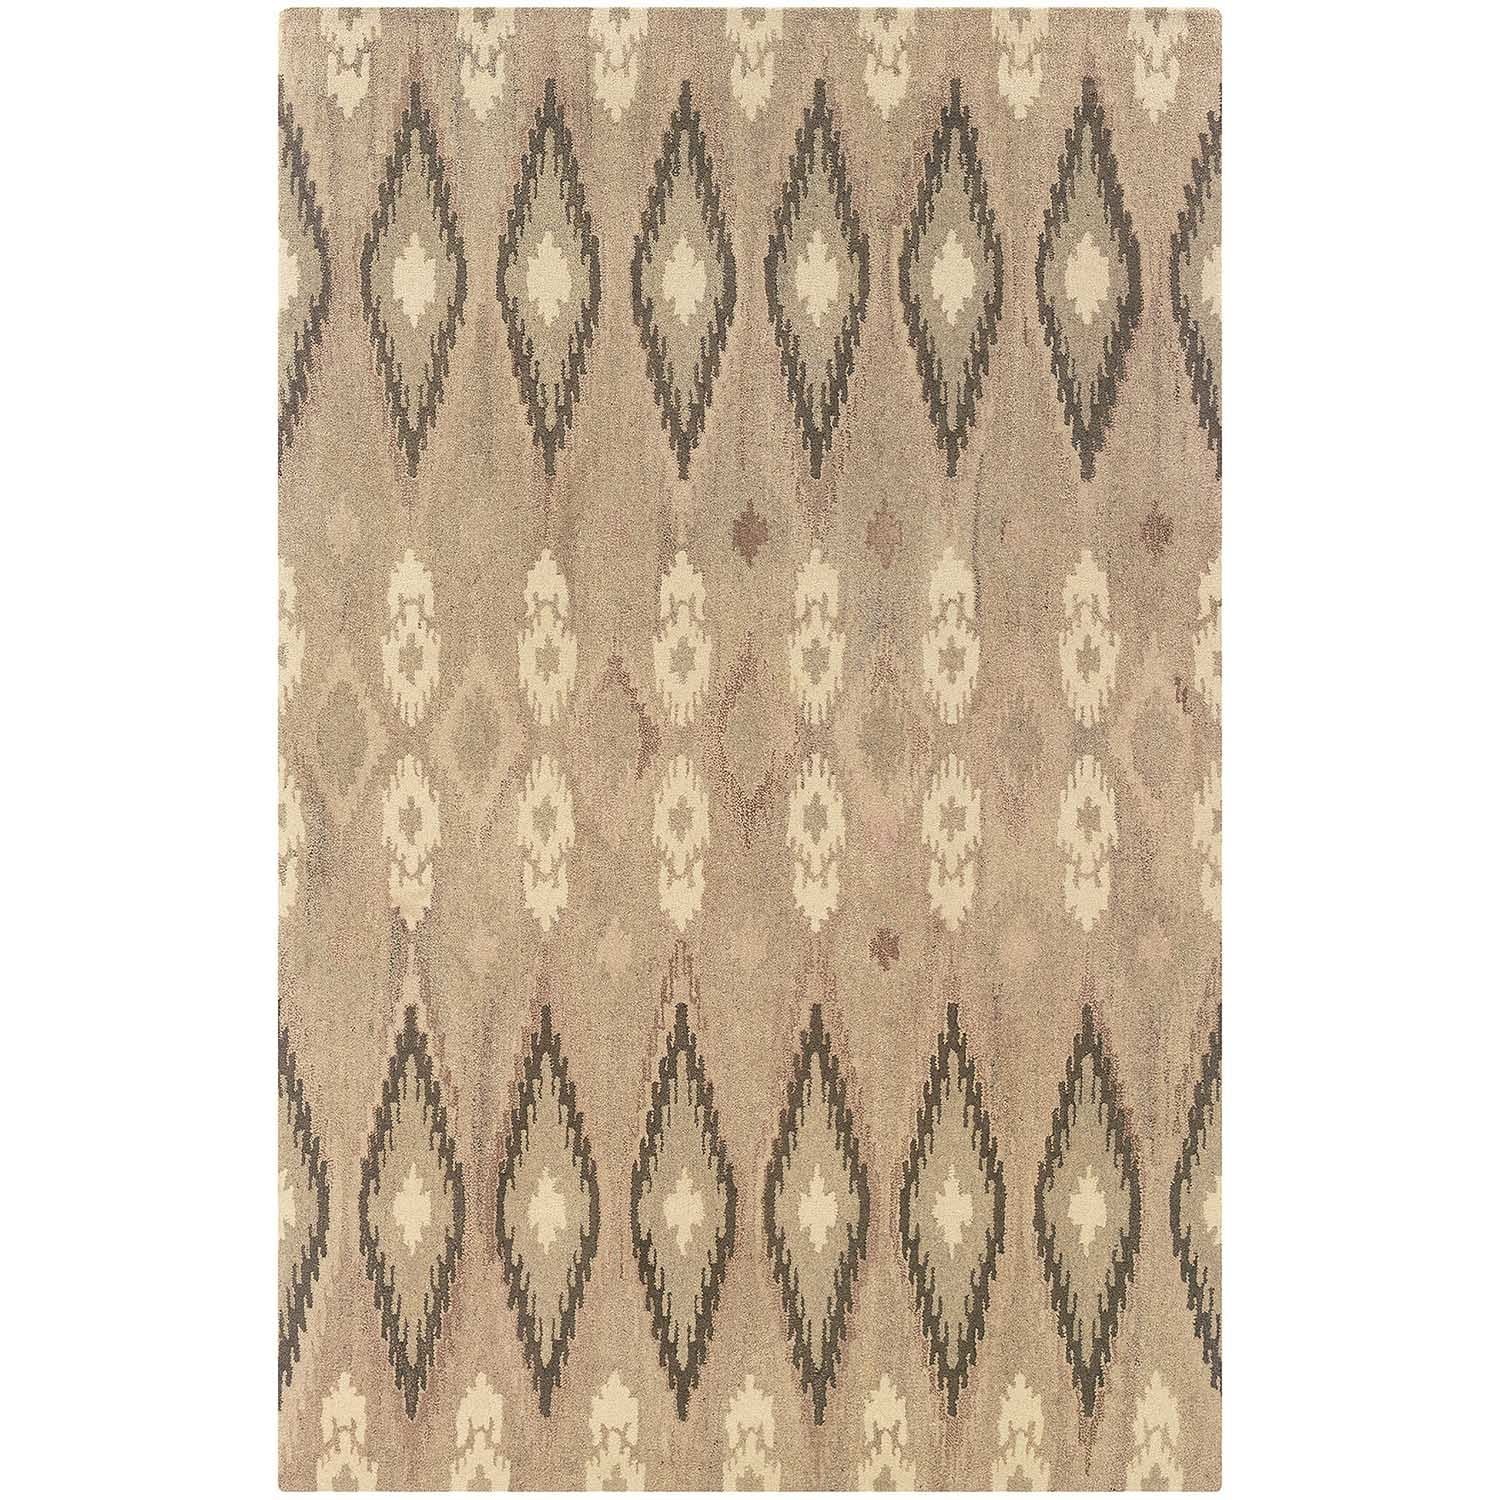 Style Haven Ikat Pattern Hand made Beige/ Ivory Rug (8 X 10) Beige Size 8 x 10